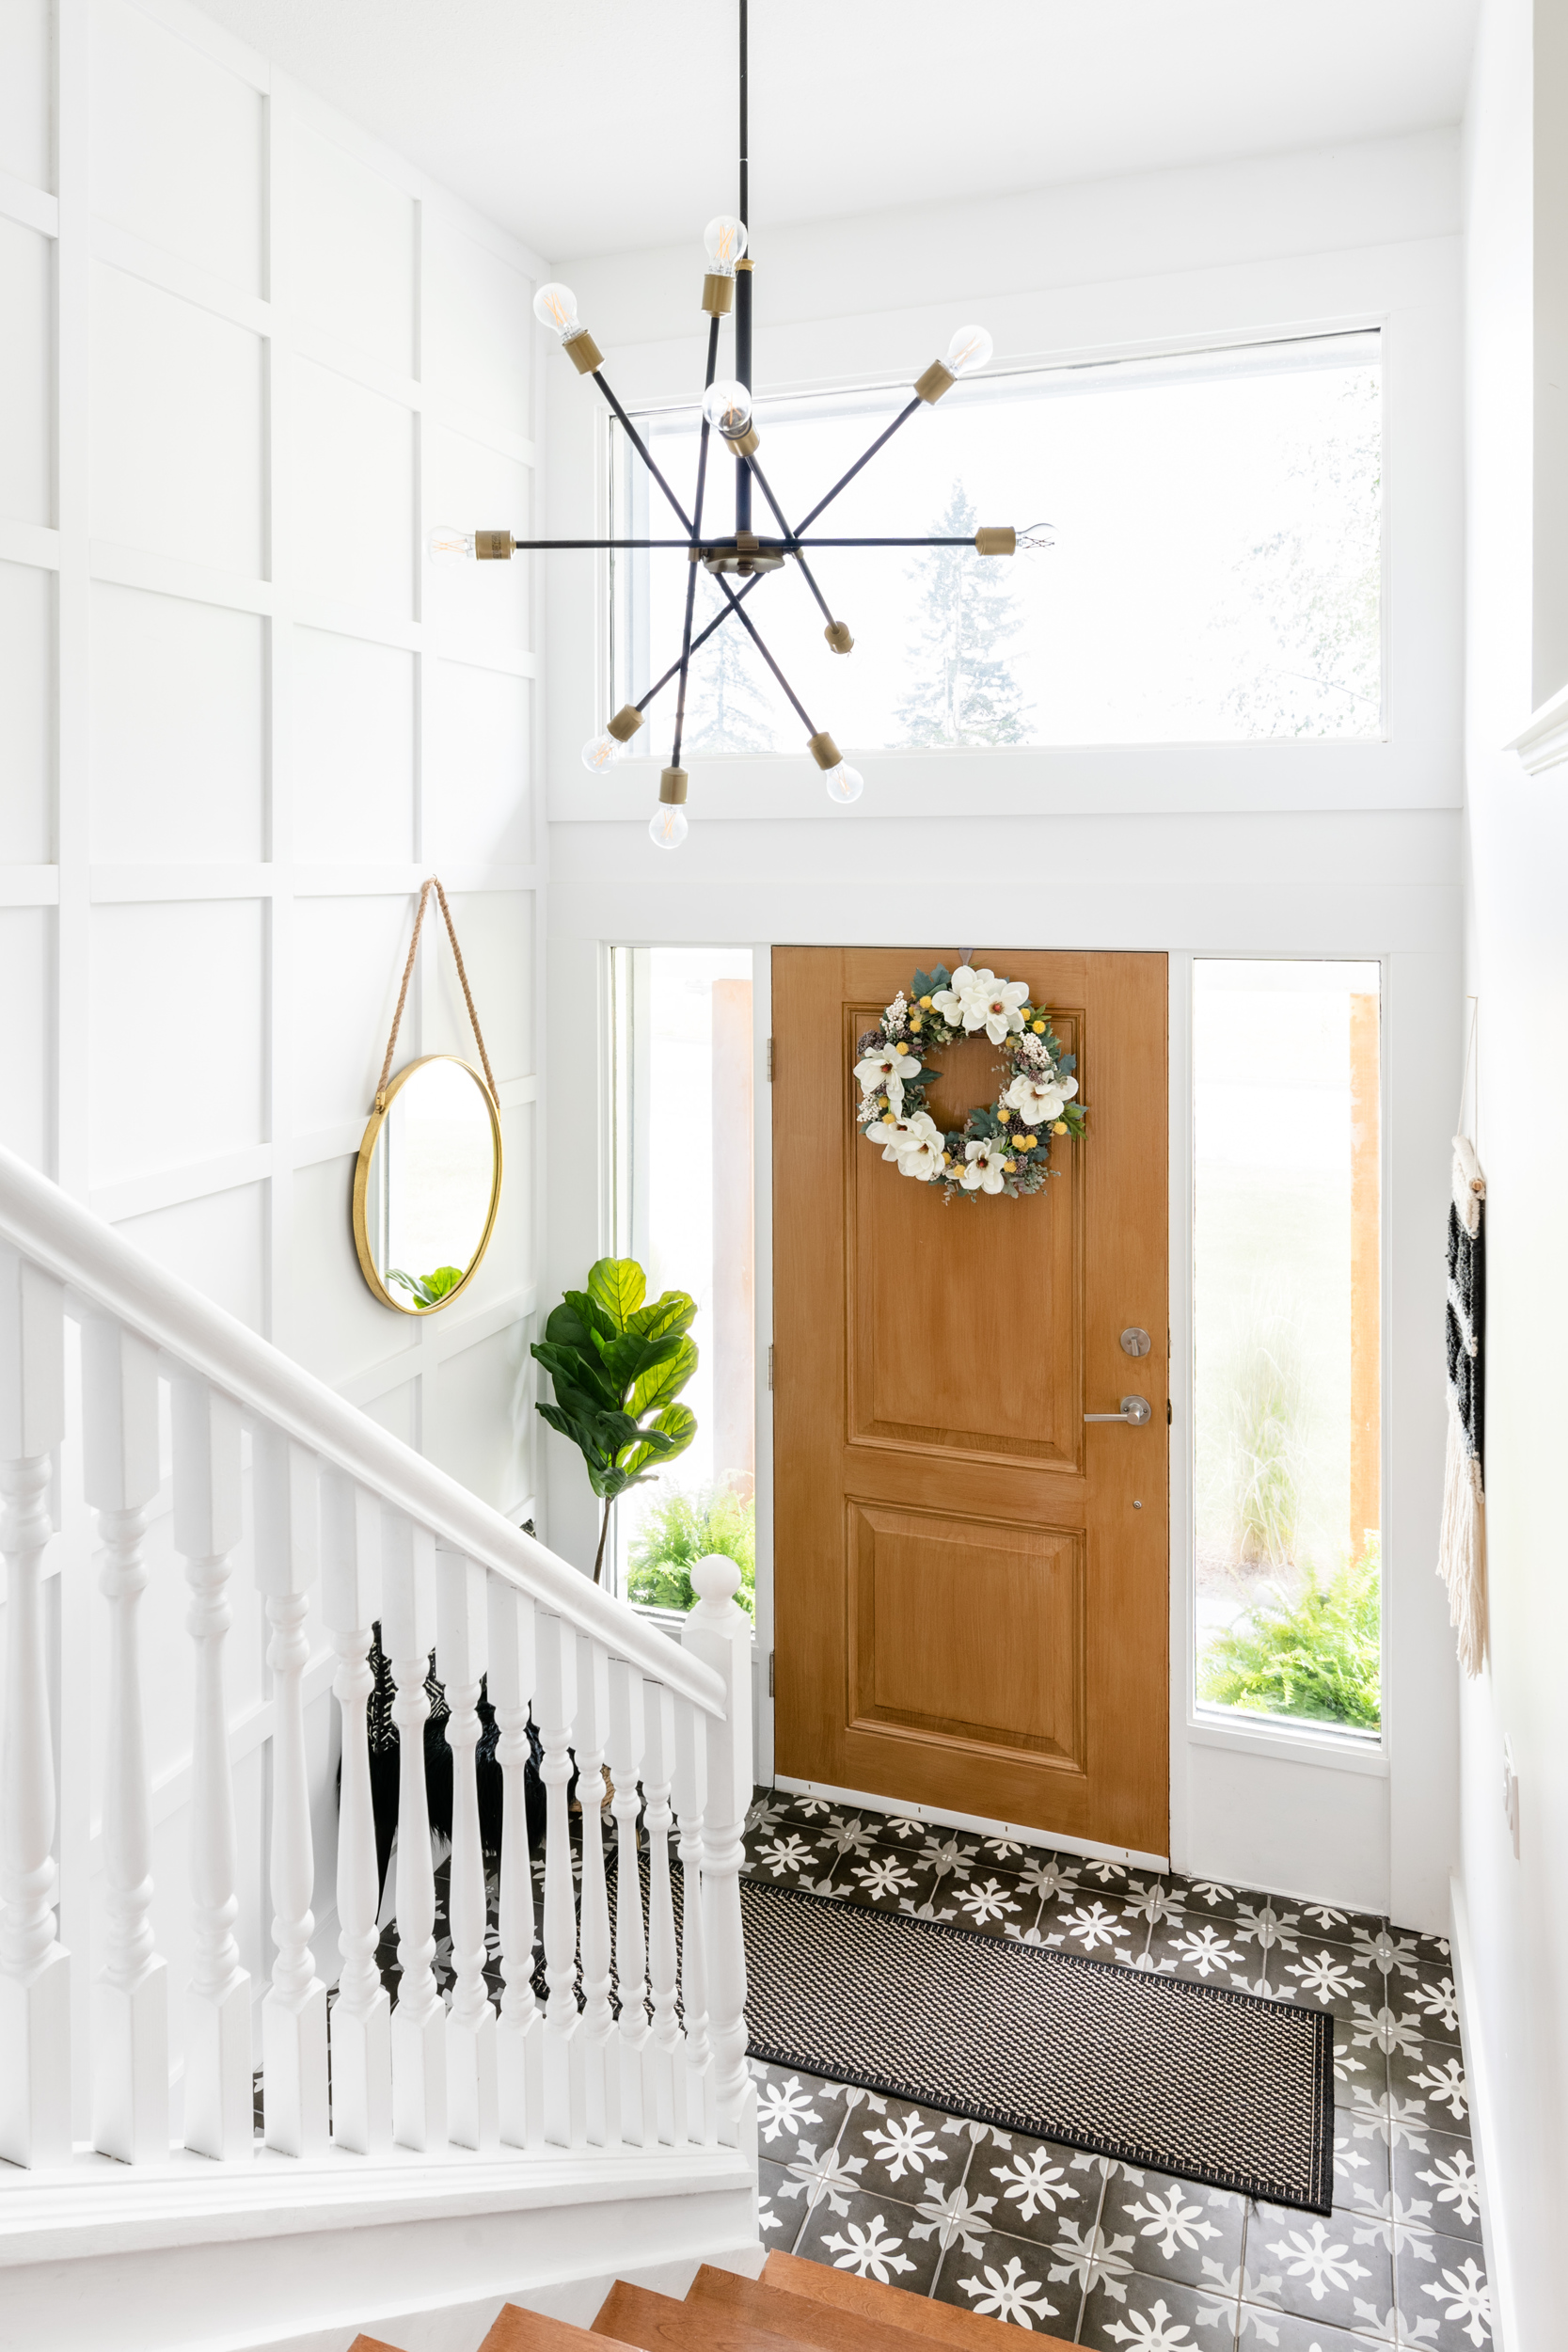 A beautiful split level entry featuring modern lighting, panelled moulding walls, and vintage style tile